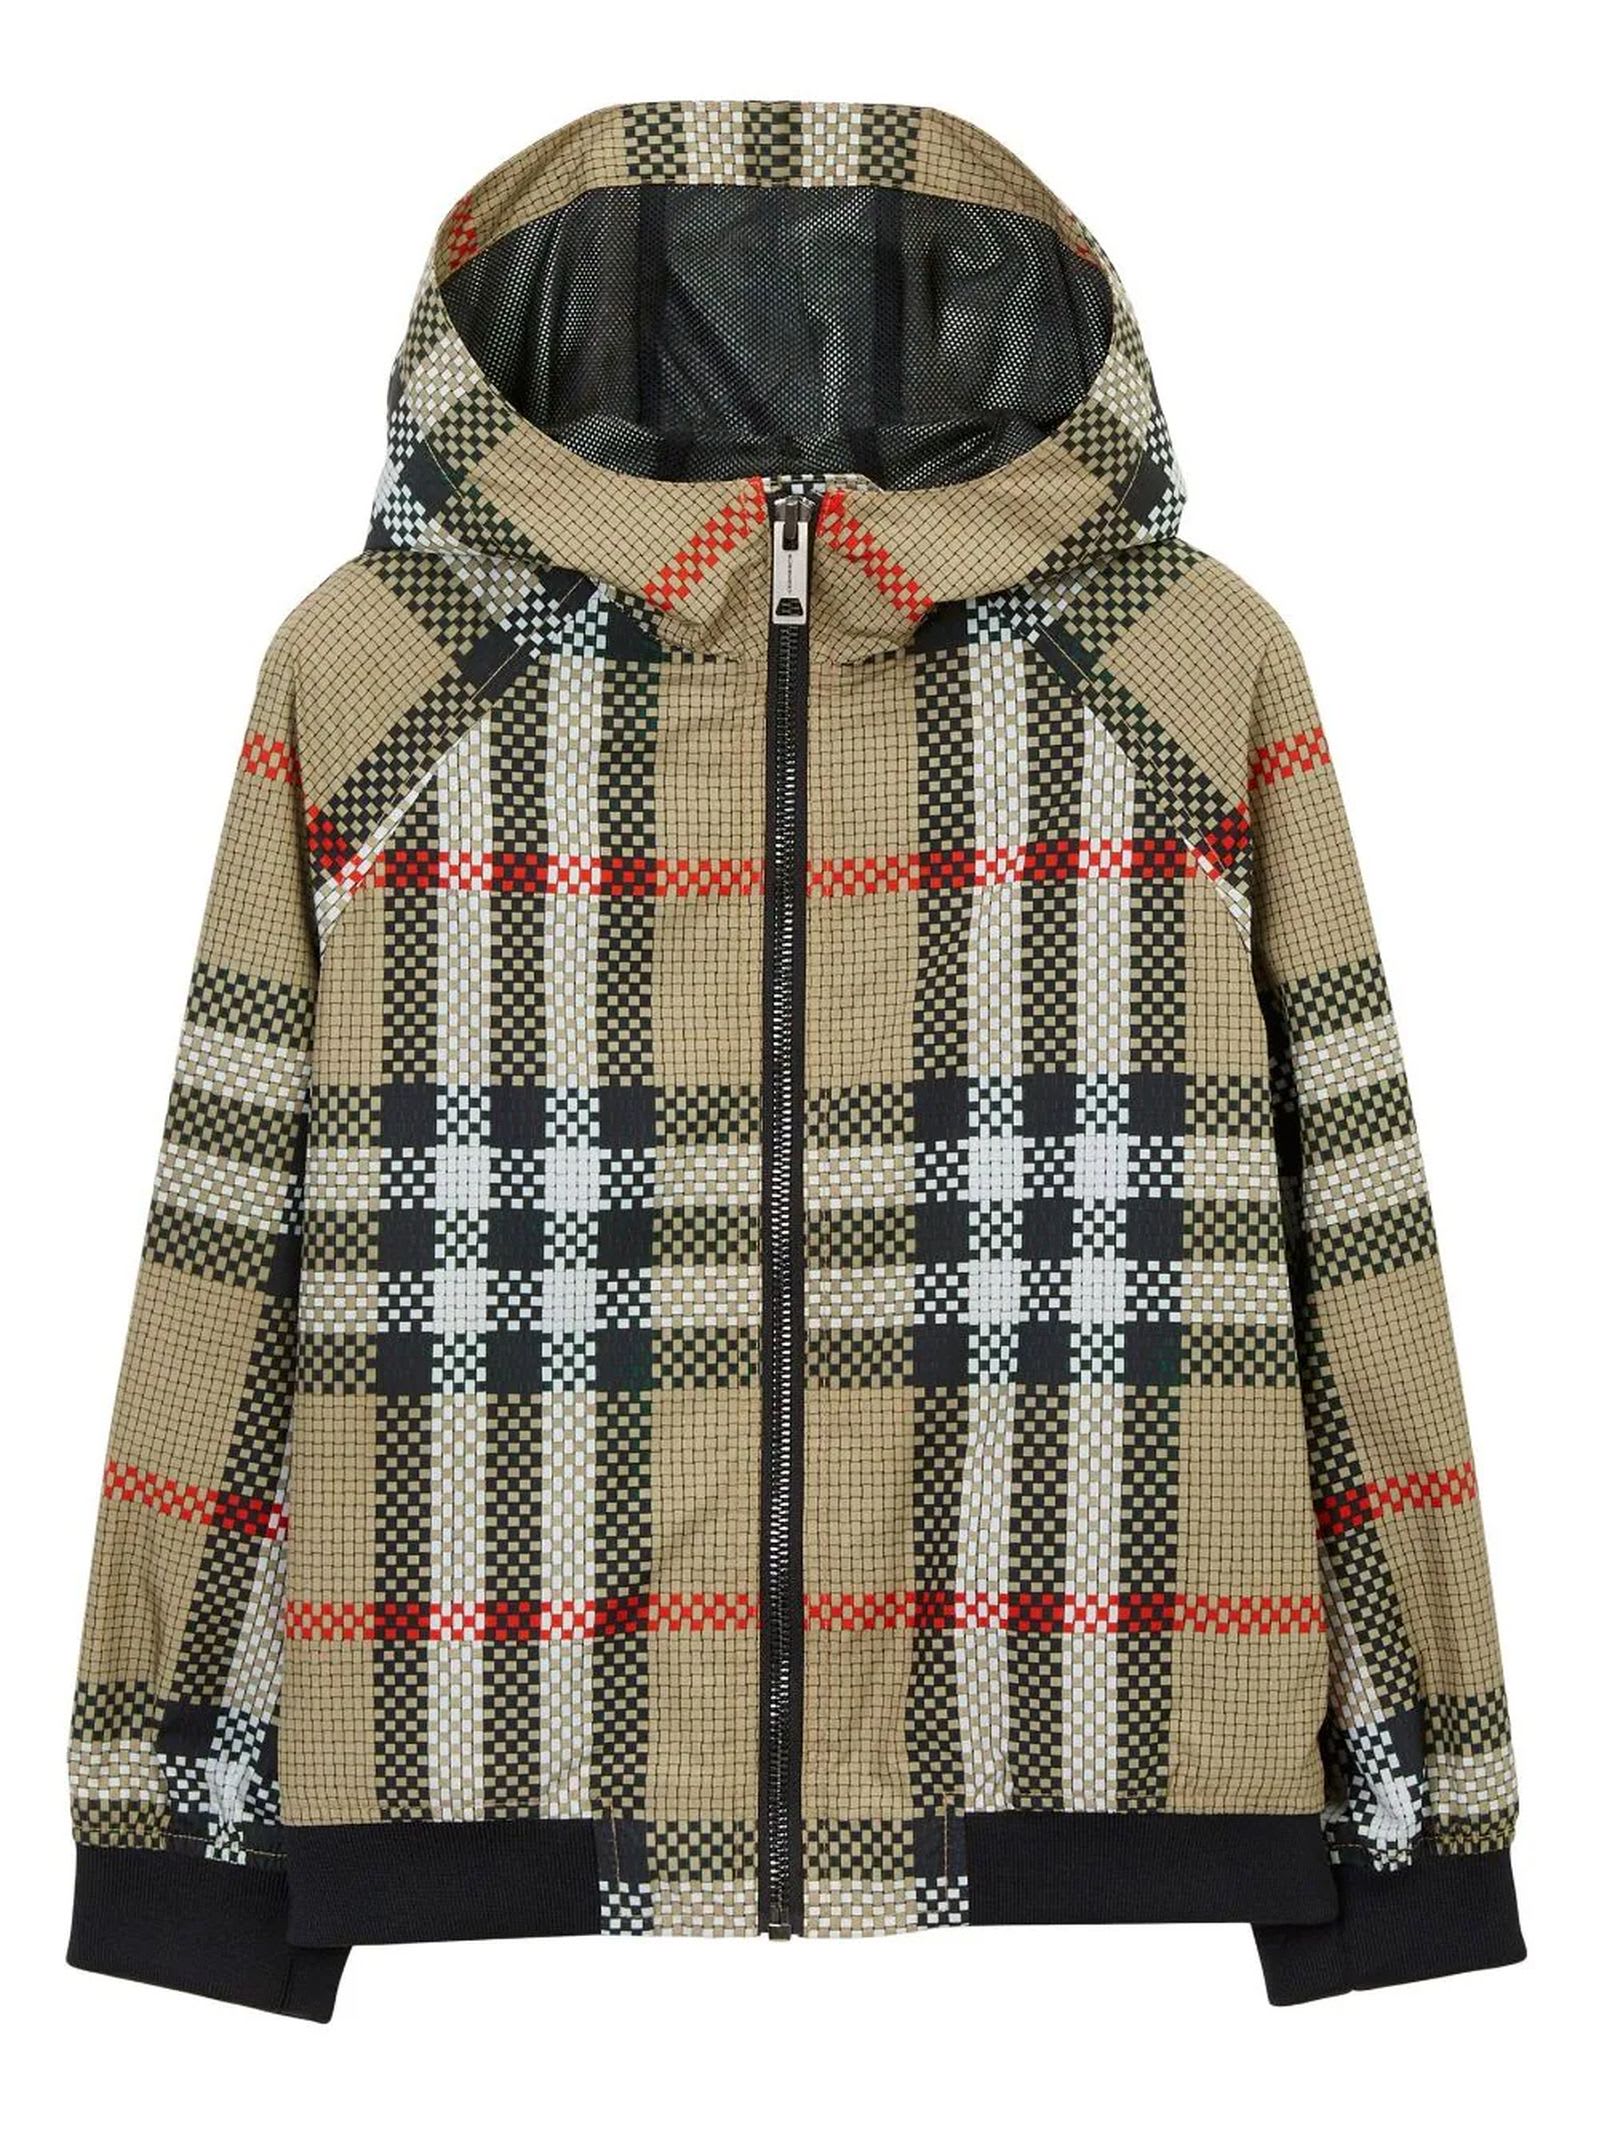 BURBERRY BEIGE AND BLACK HOODED JACKET